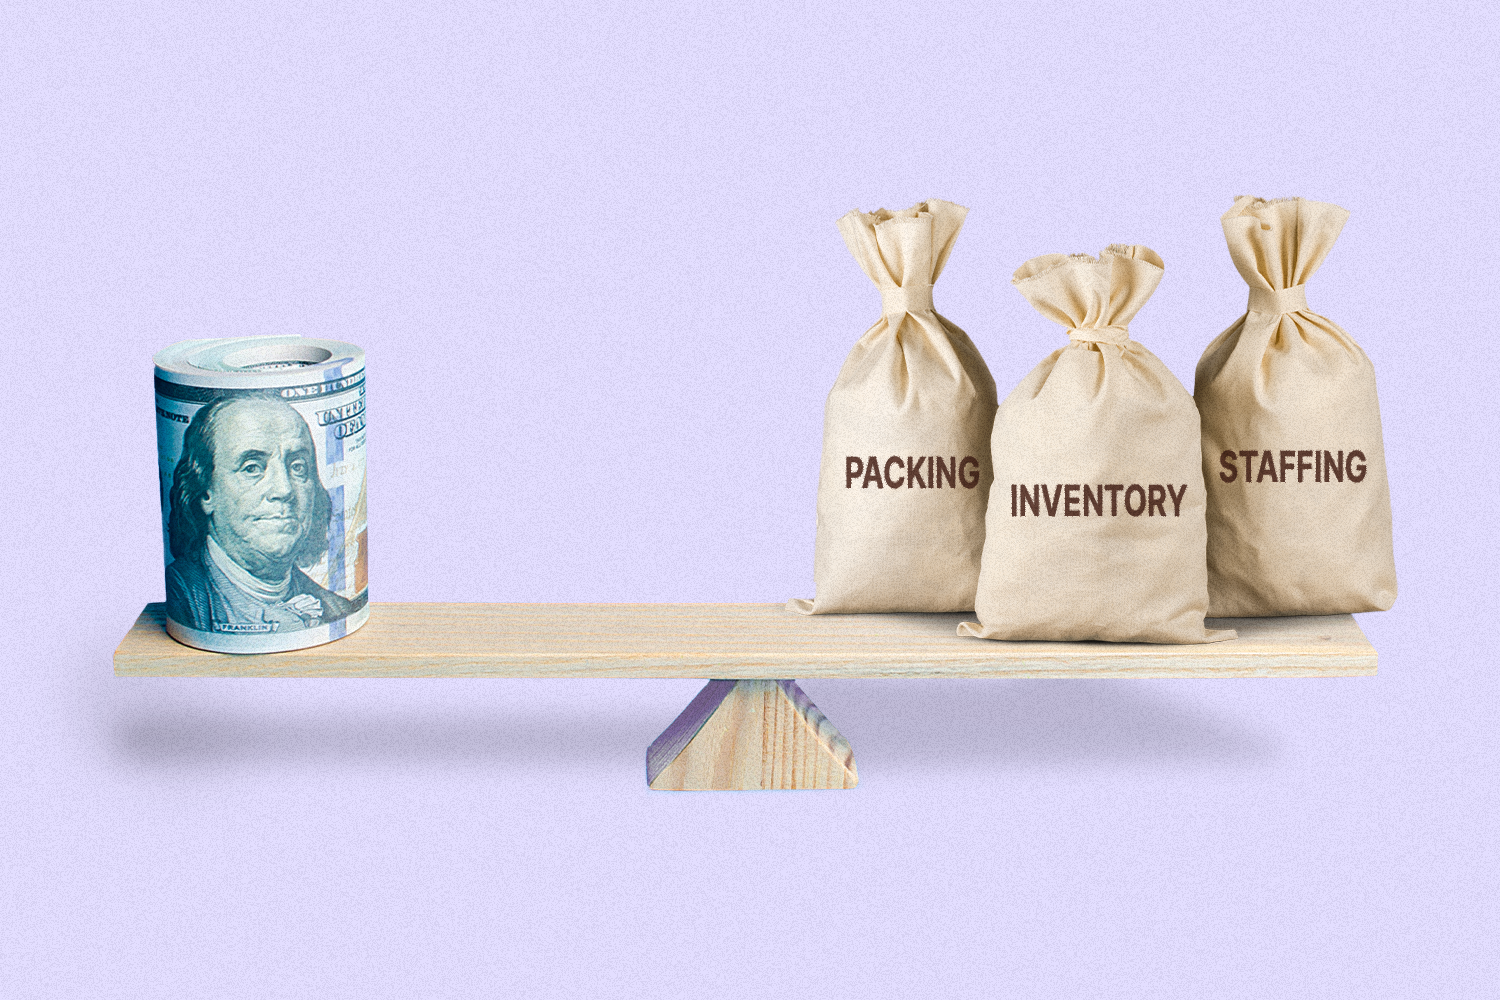 A seesaw with a rolled up stack of money on one side and three bags individually labeled "Packing," "Inventory," and "Staffing" on the other